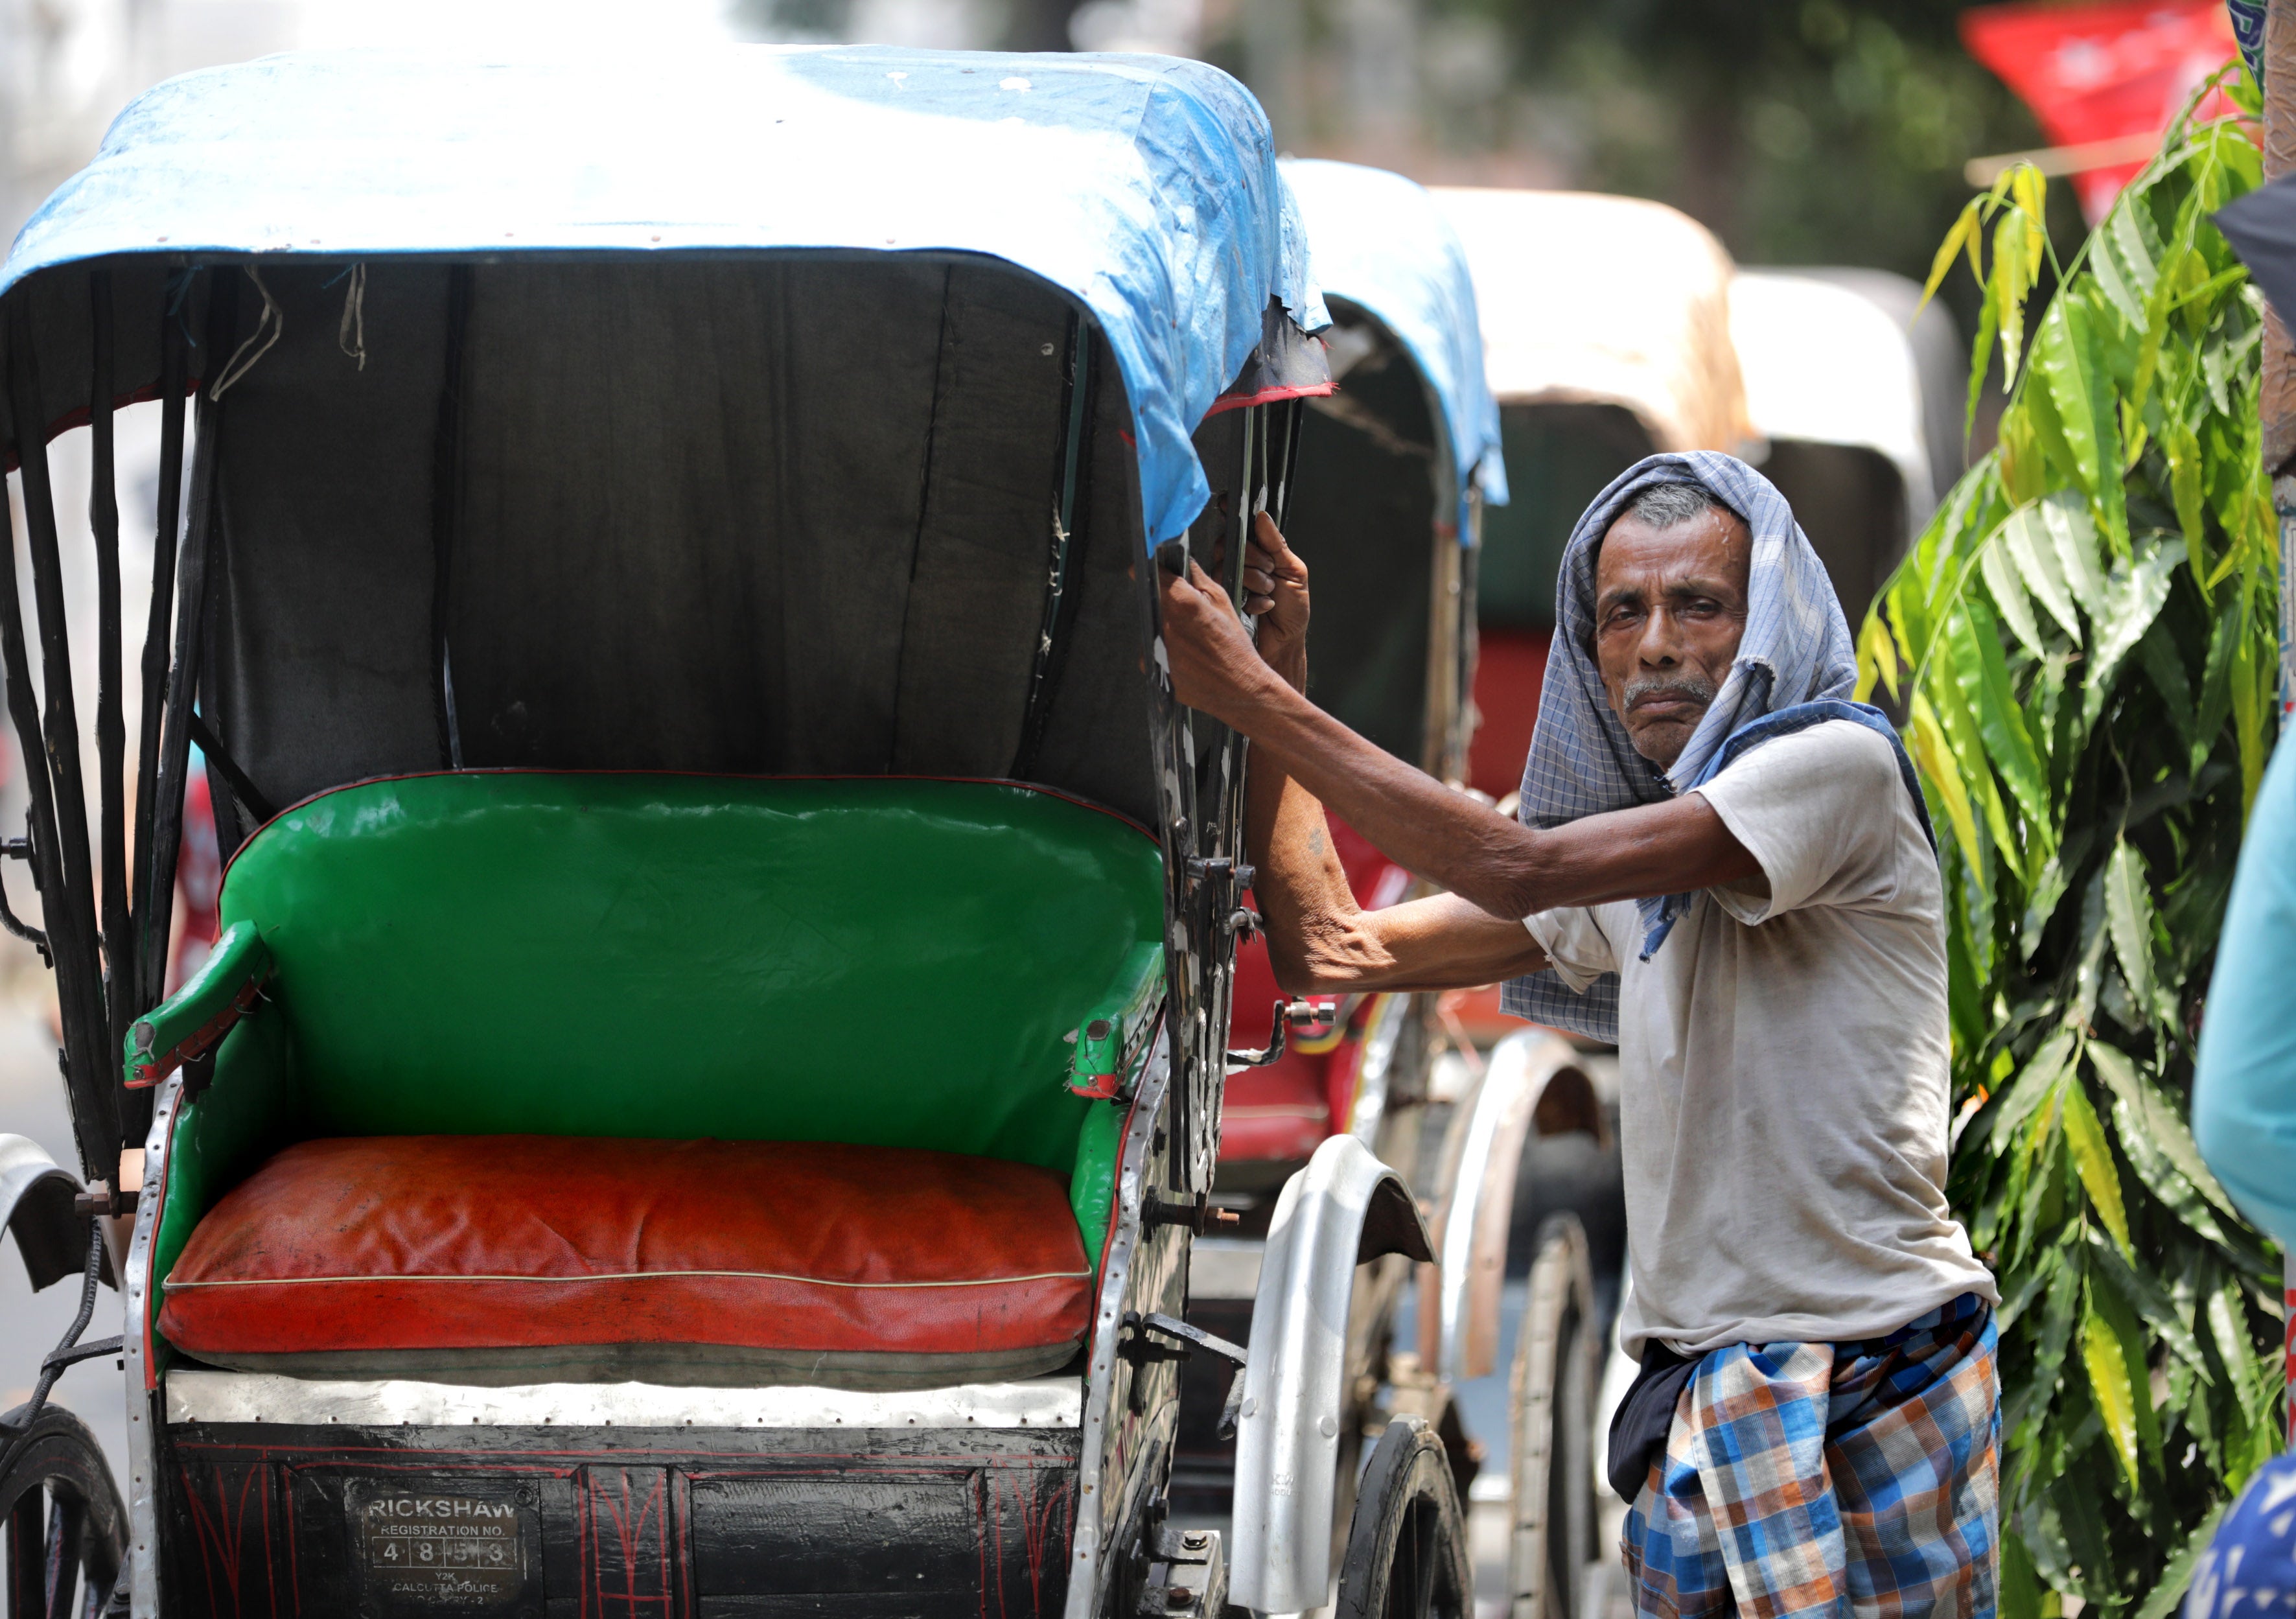 An rikshaw puller waits during a hot afternoon in Kolkata, eastern India on 19 April.